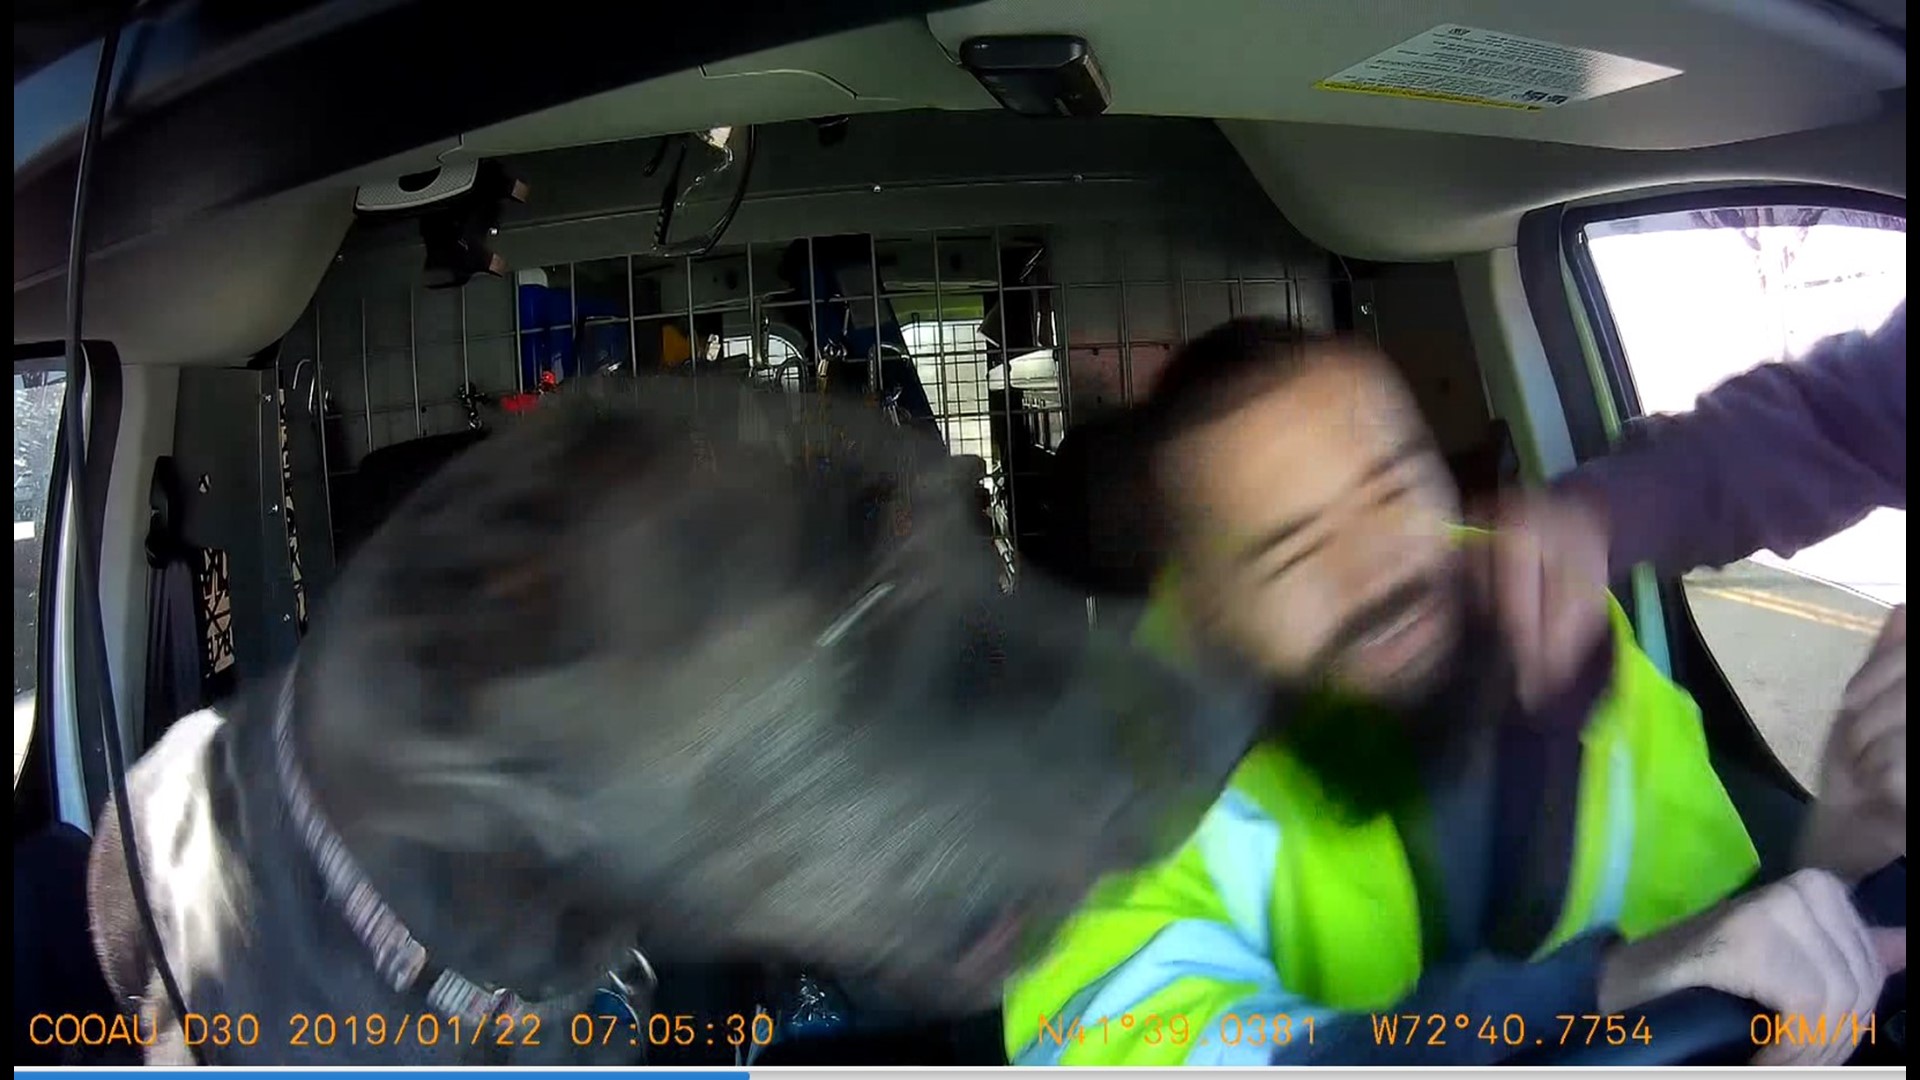 FOX61's Matt Caron obtained citizen dash cam and police body cam video, appearing to show a Meriden officer punch a person in the face during a road rage incident.